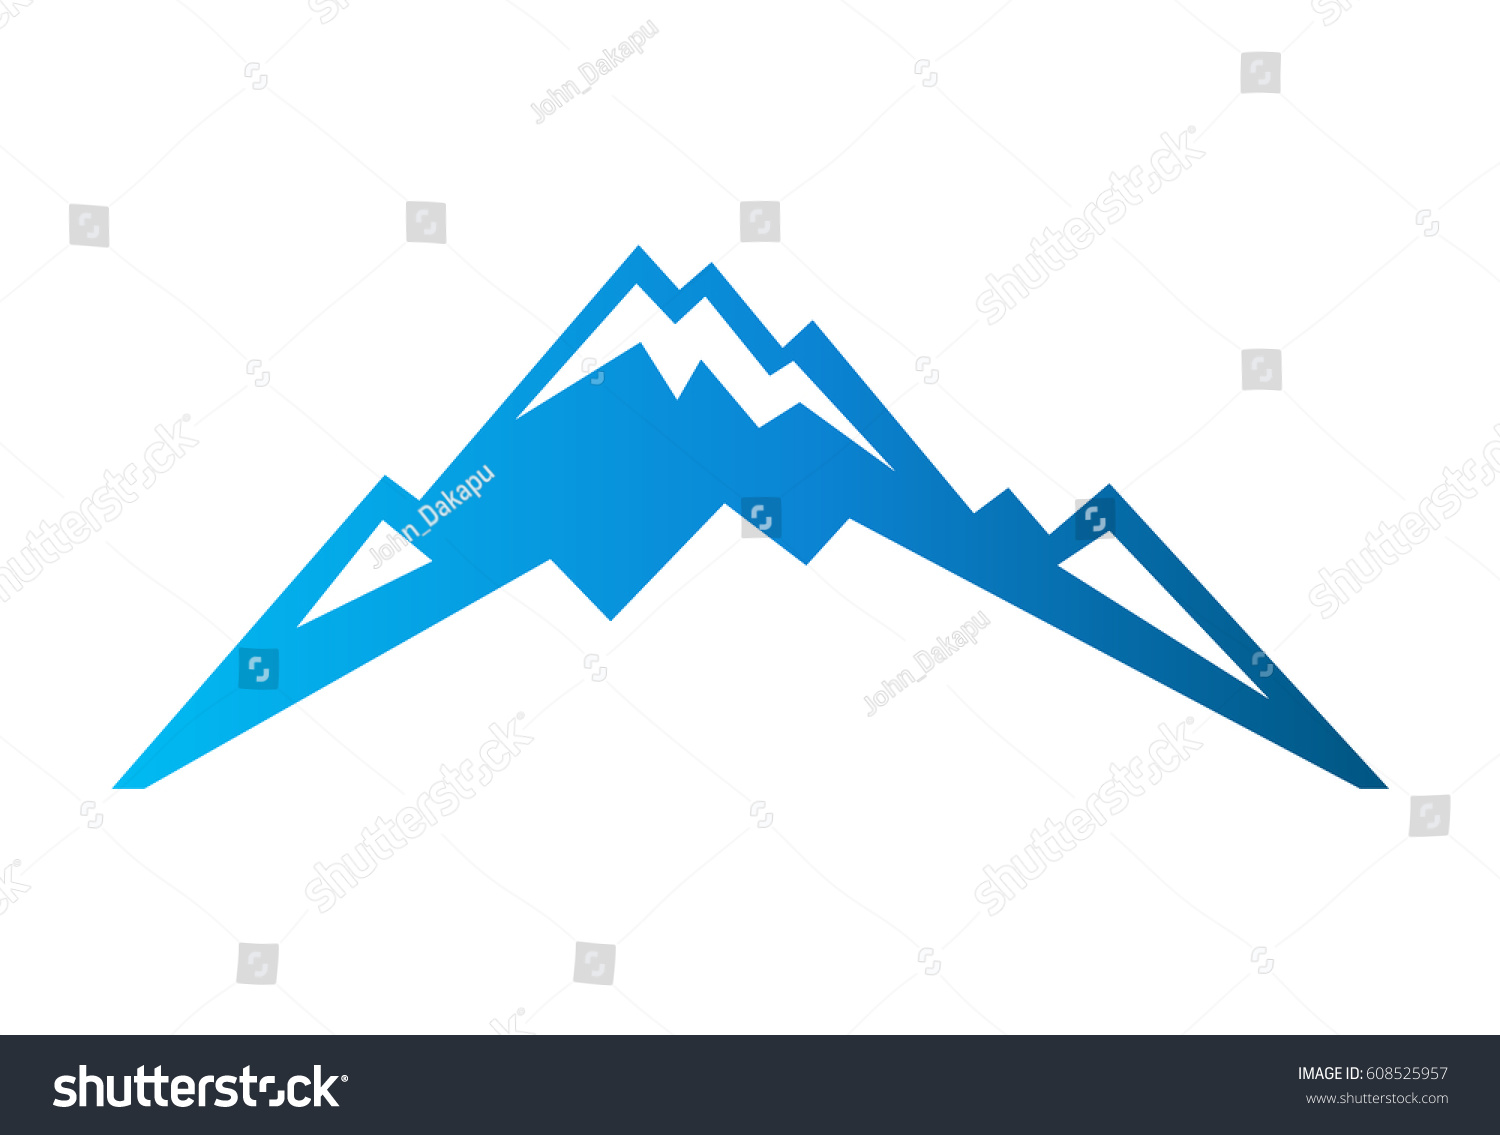 Blue Mountain Vector Icon Isolated On Stock Vector 608525957 - Shutterstock